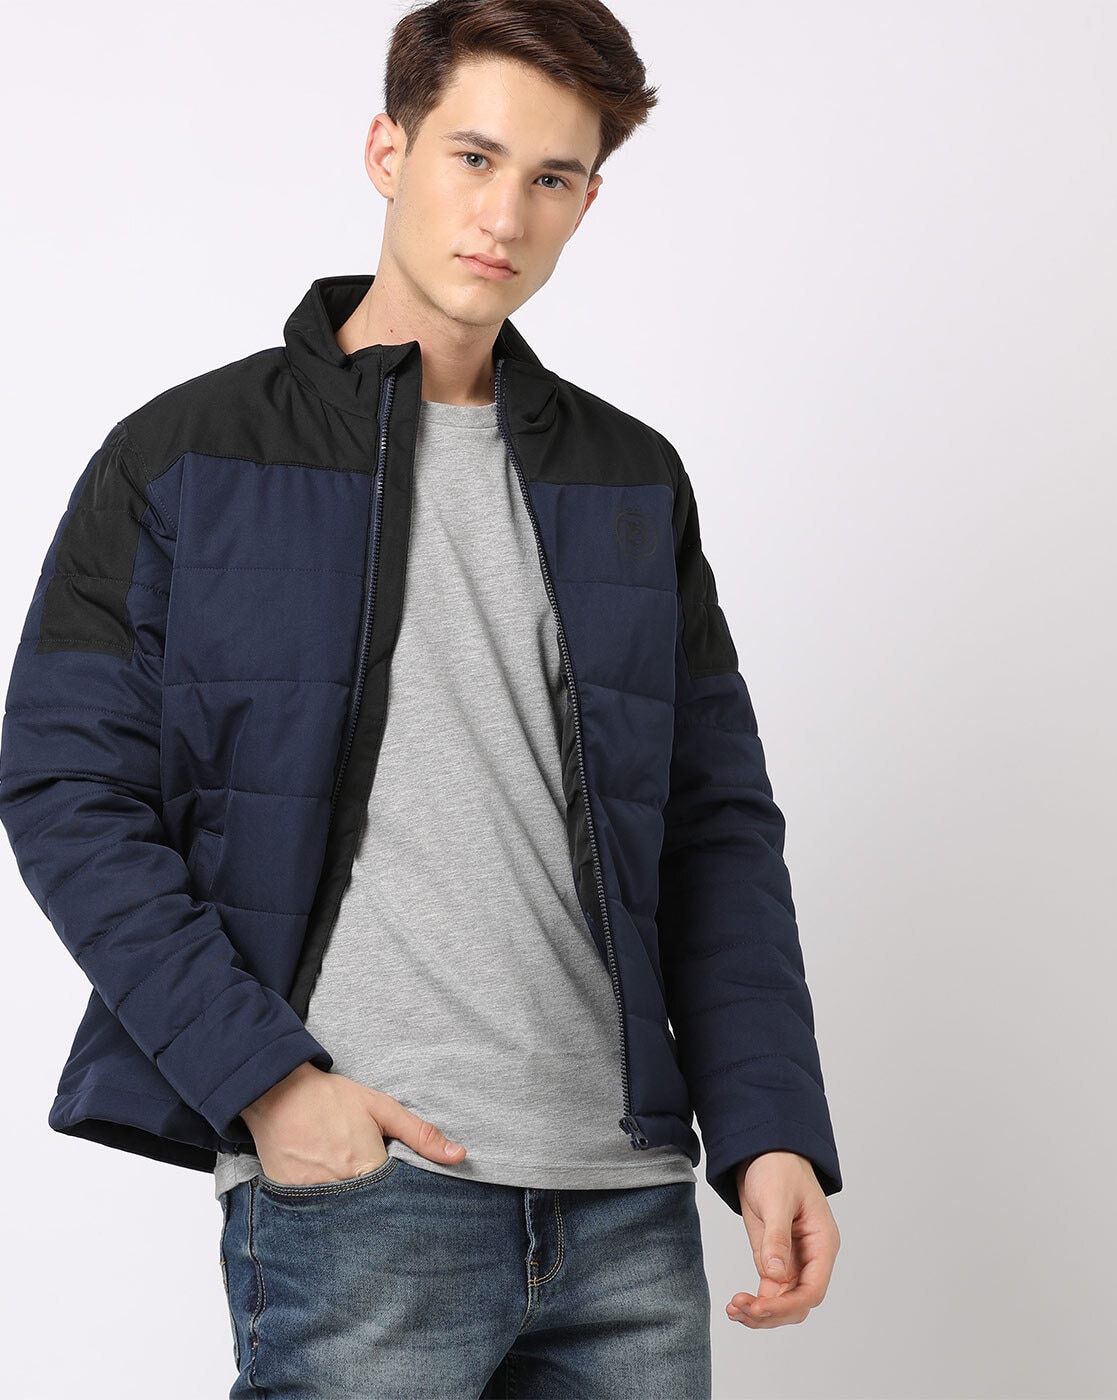 Buy Black Jackets & Coats for Men by LEATHER RETAIL Online | Ajio.com